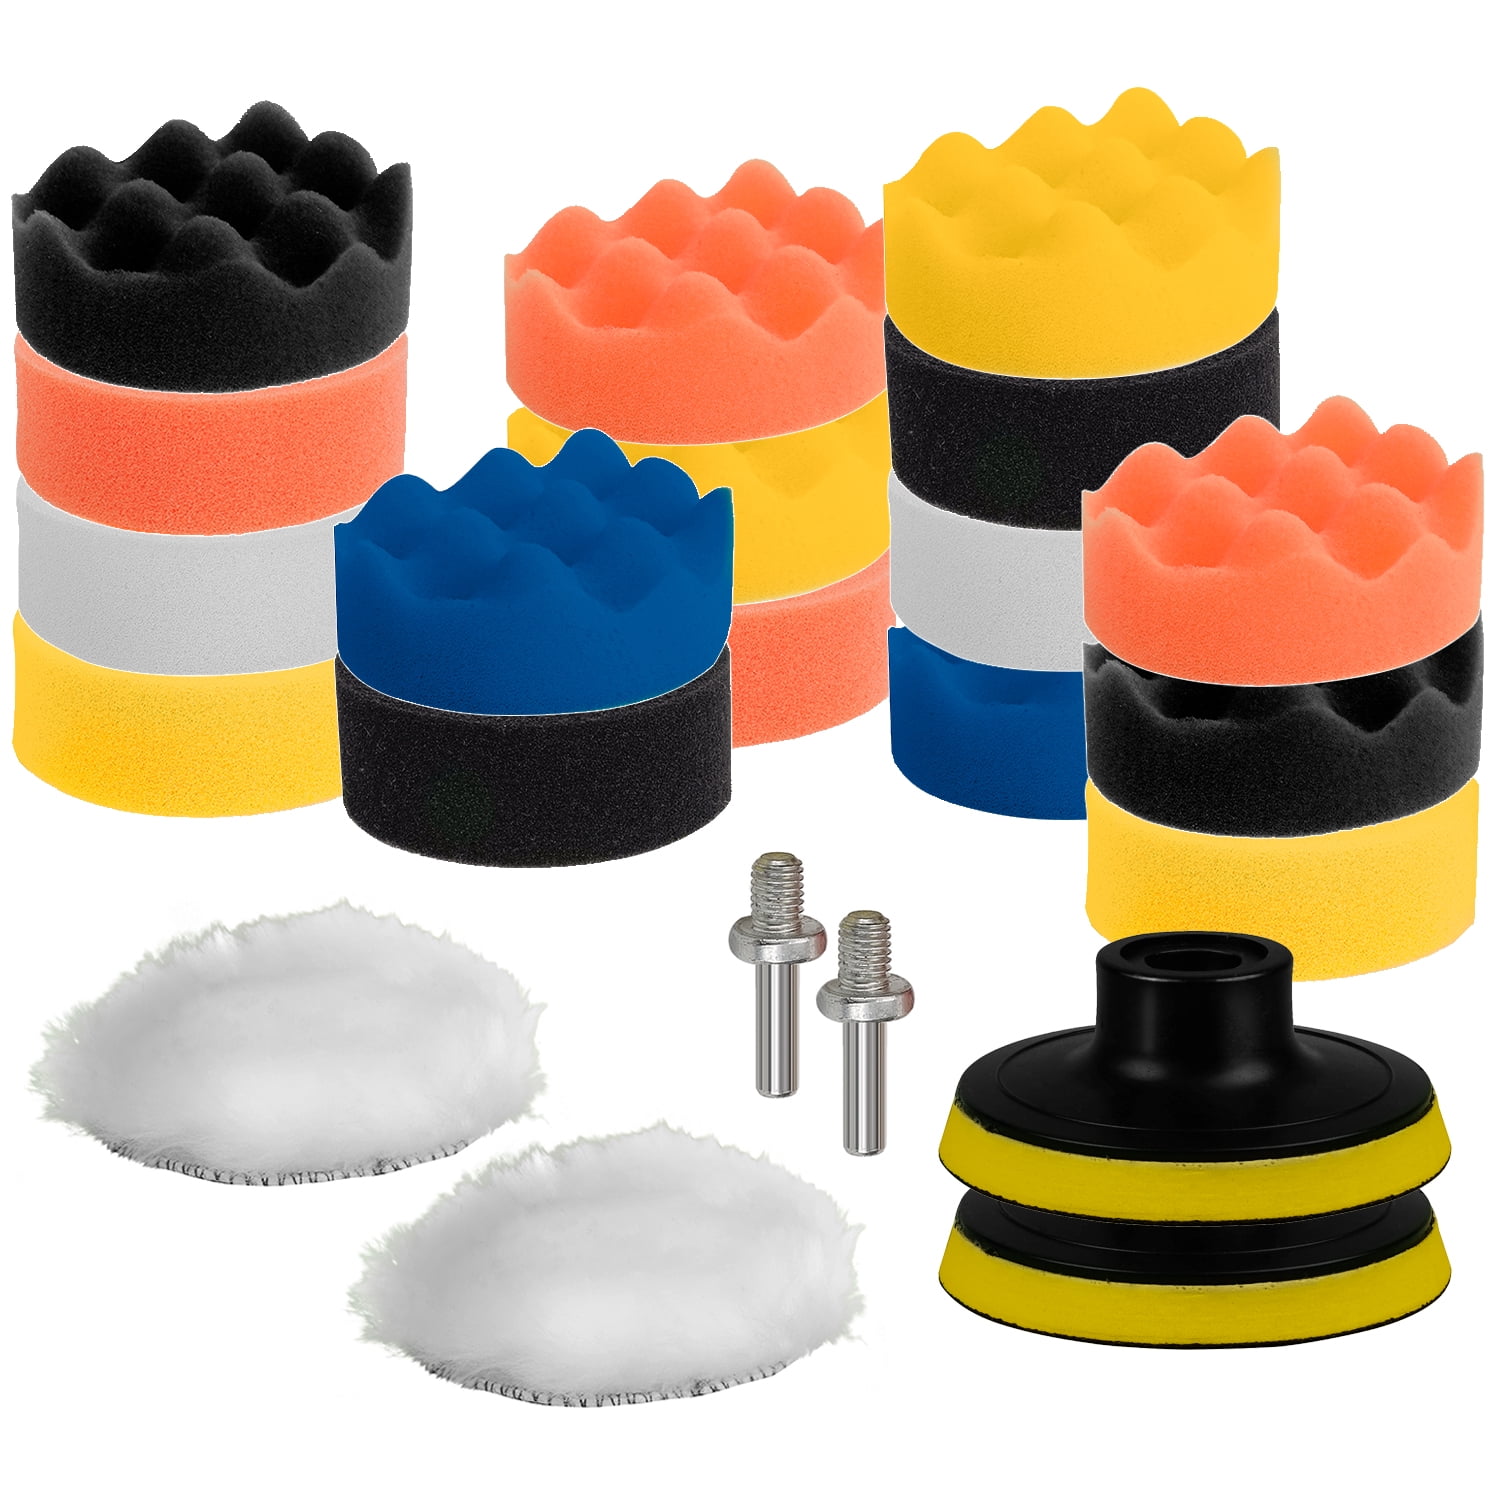 Details about   5Pcs Polisher Buffer Wheel Polishing Buffing Pad Brush For Rotary Drill Bit SK 